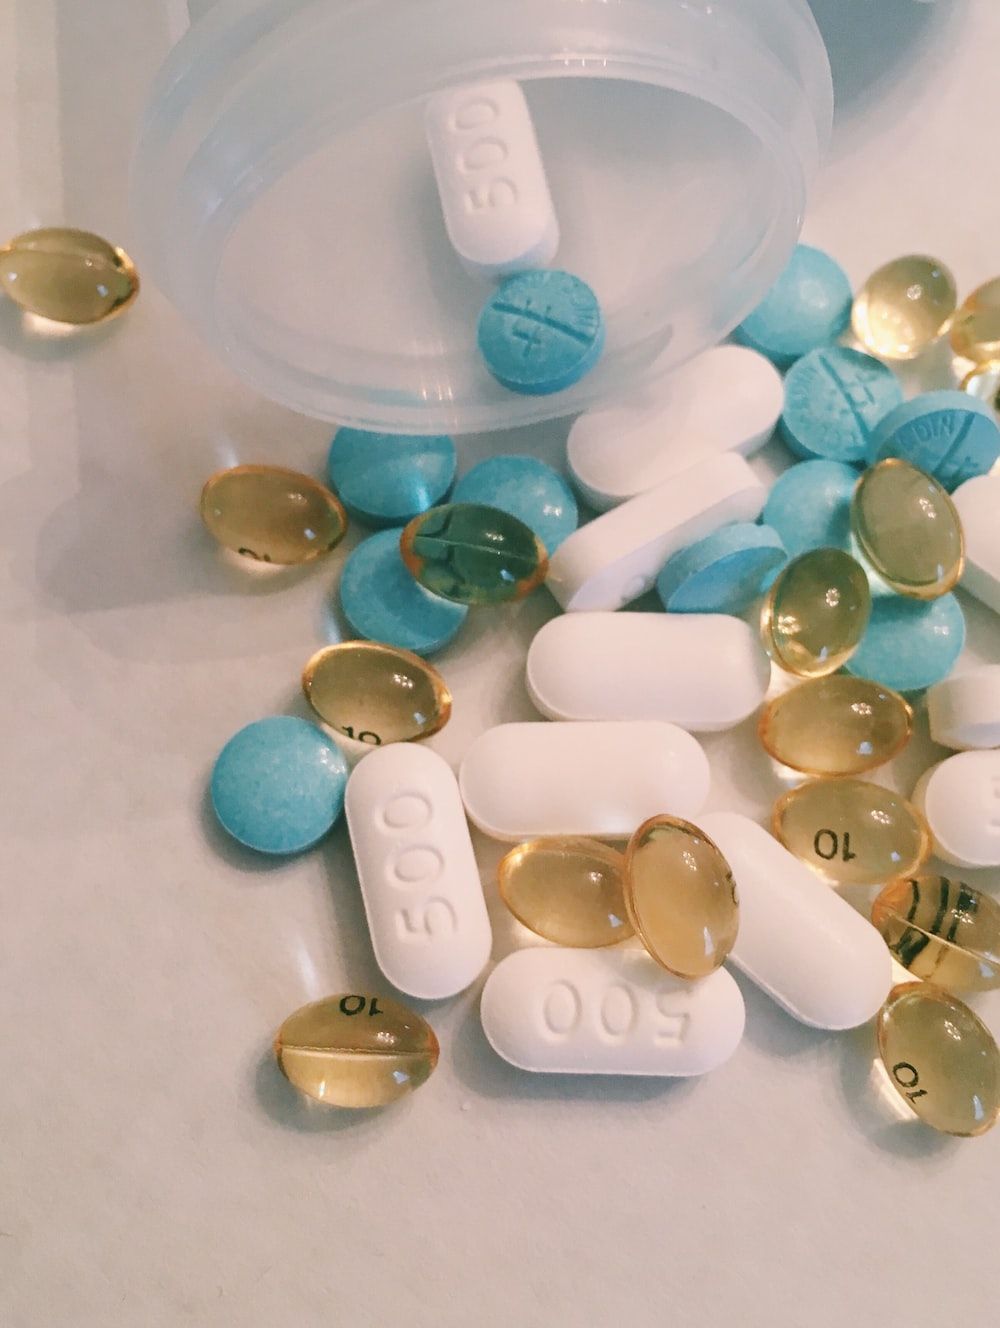 A bottle of pills, some of which are blue, white, and yellow. - Medical